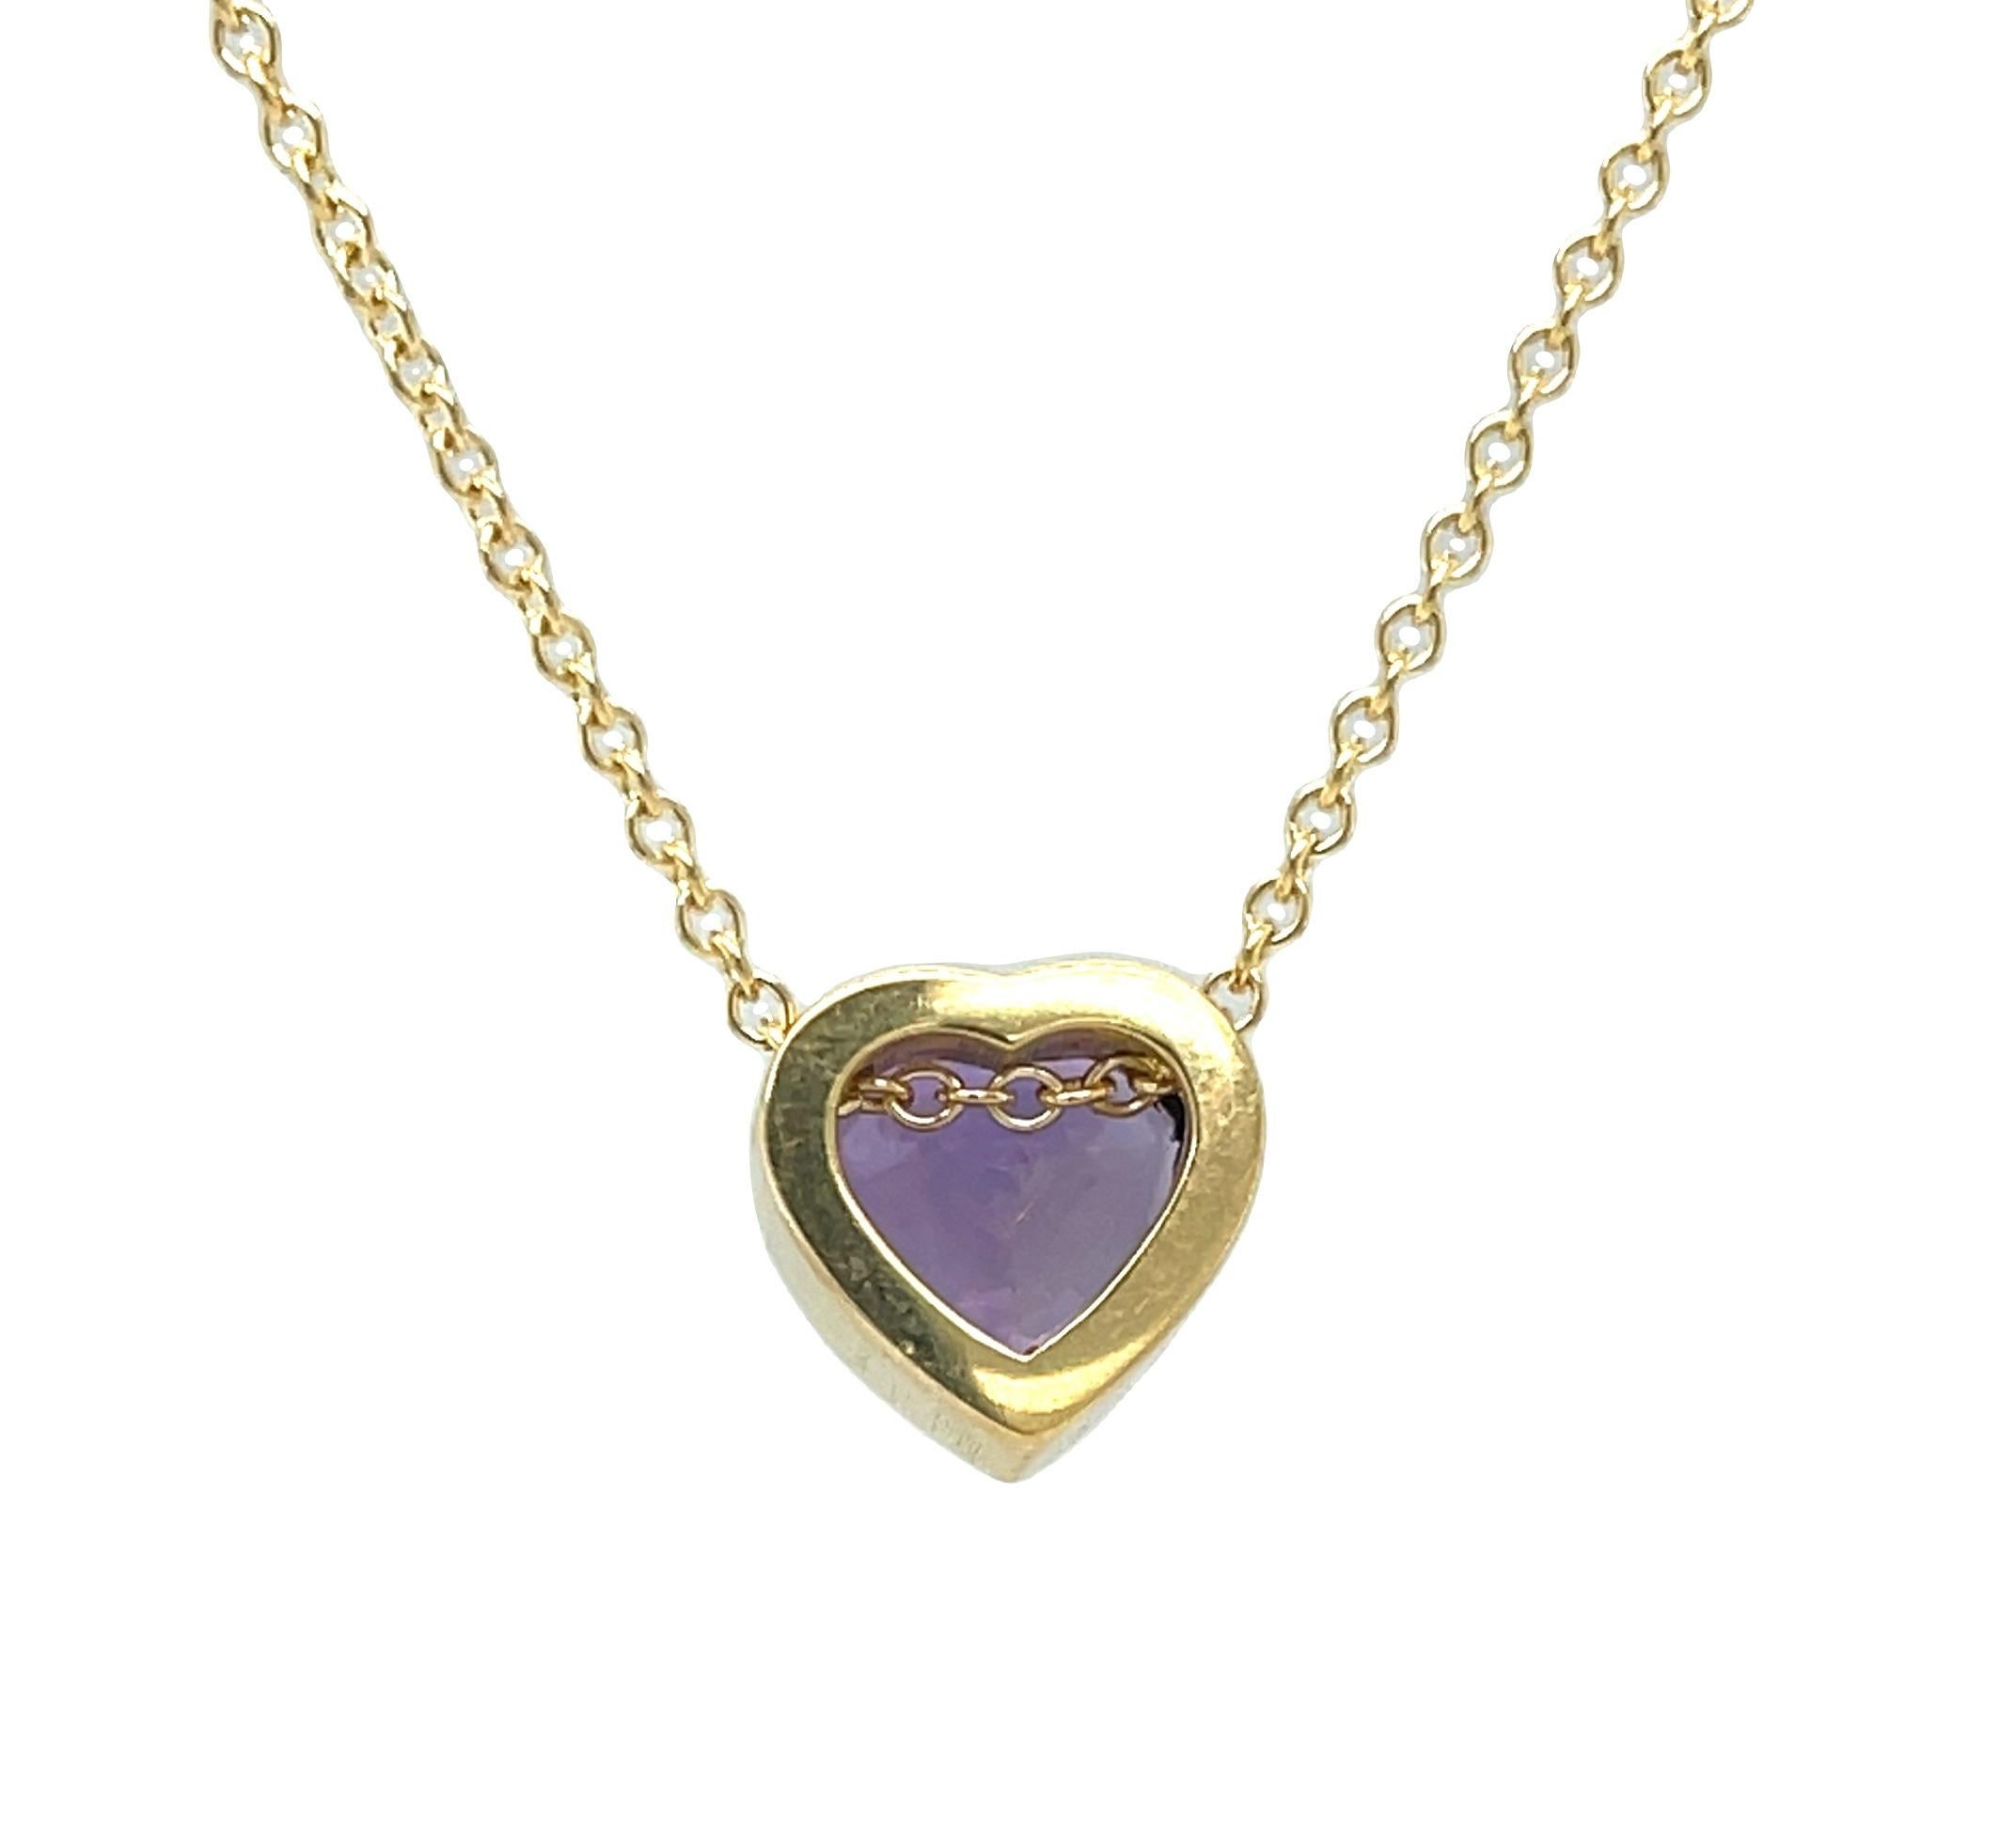 GIA Certified Unheated 3.56 Carat Purple Sapphire Heart Necklace in 18k Gold In New Condition For Sale In Los Angeles, CA